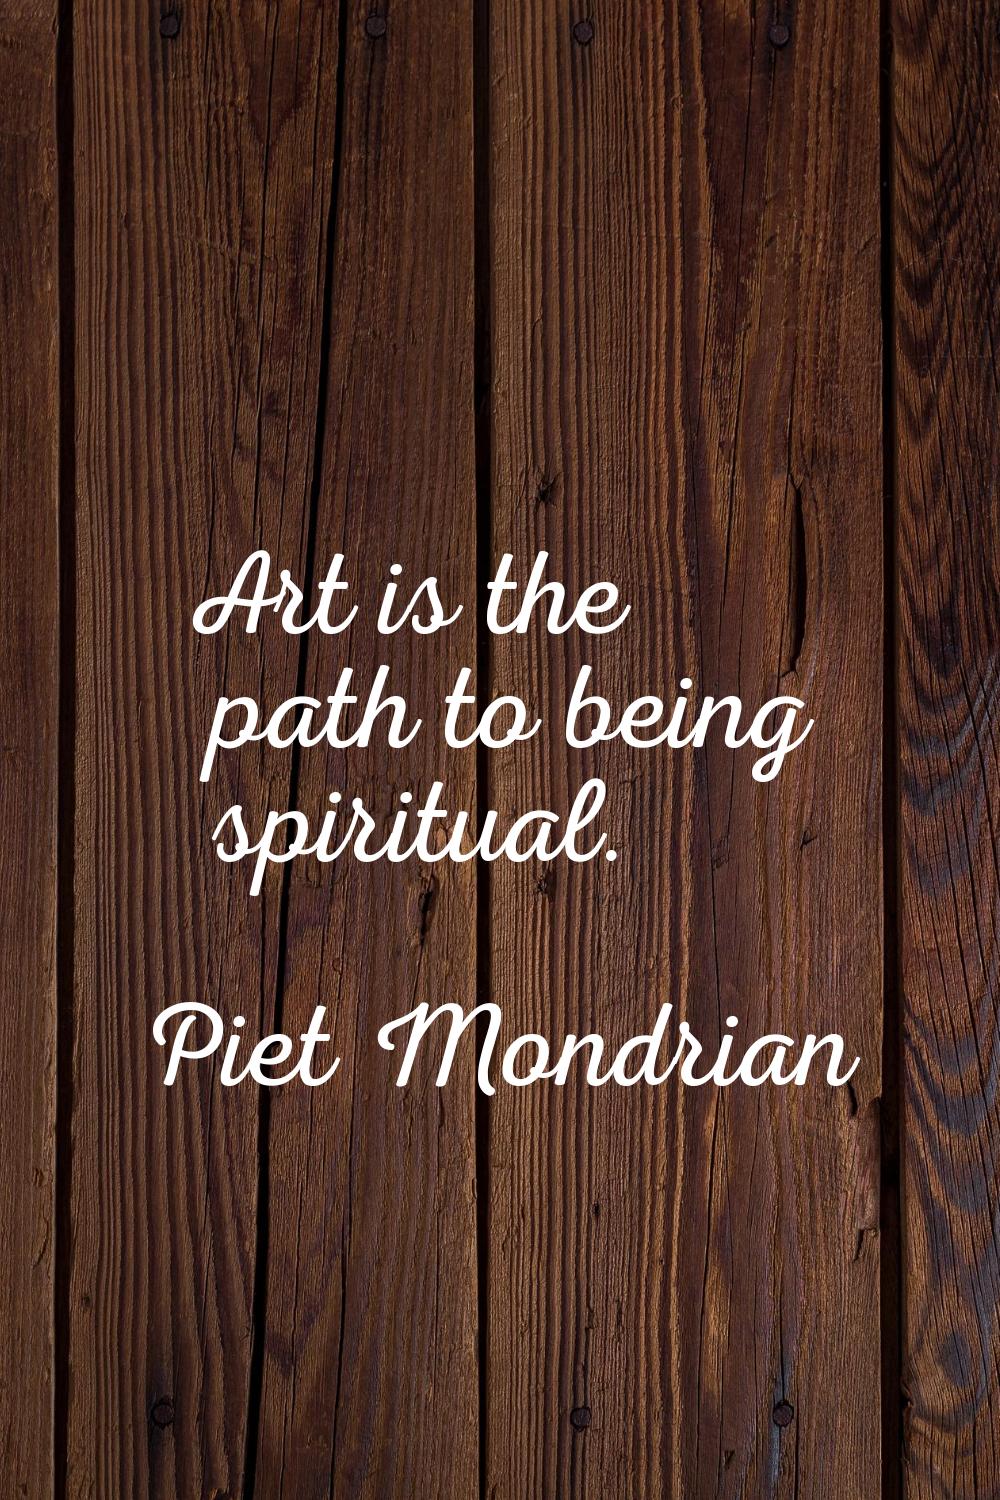 Art is the path to being spiritual.